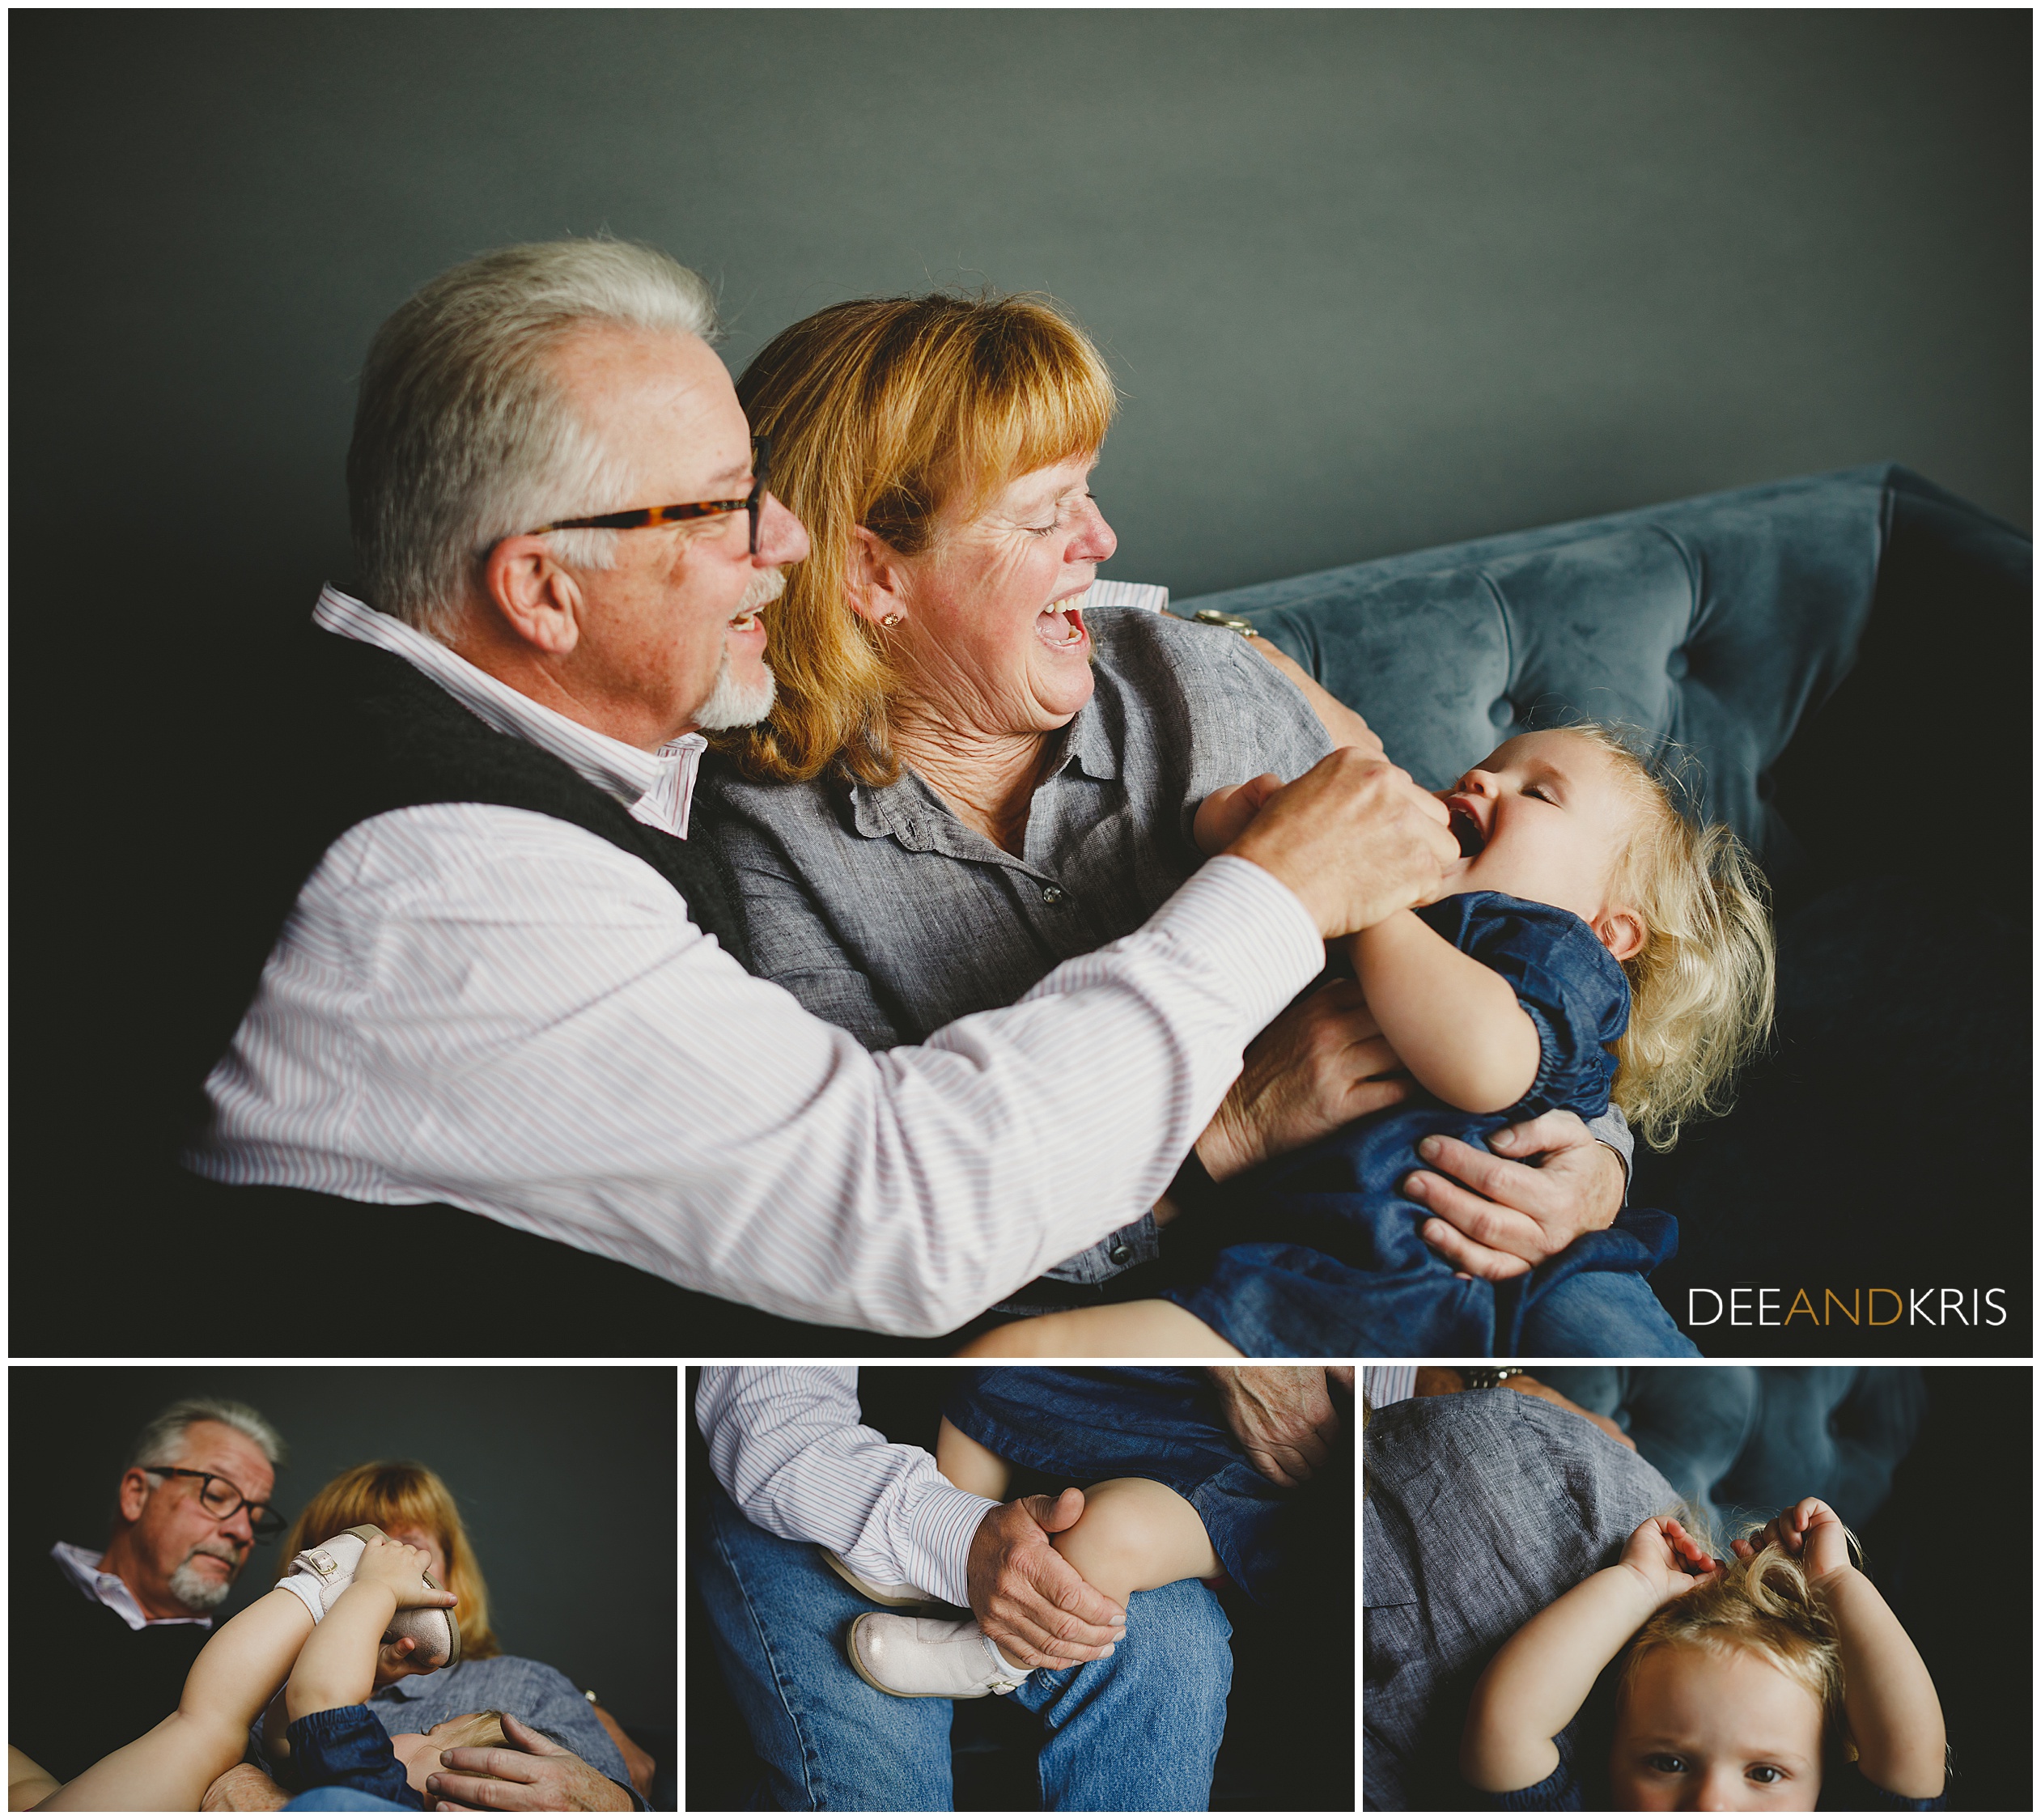 Dee and Kris Photography photography grandchild with her grandparents